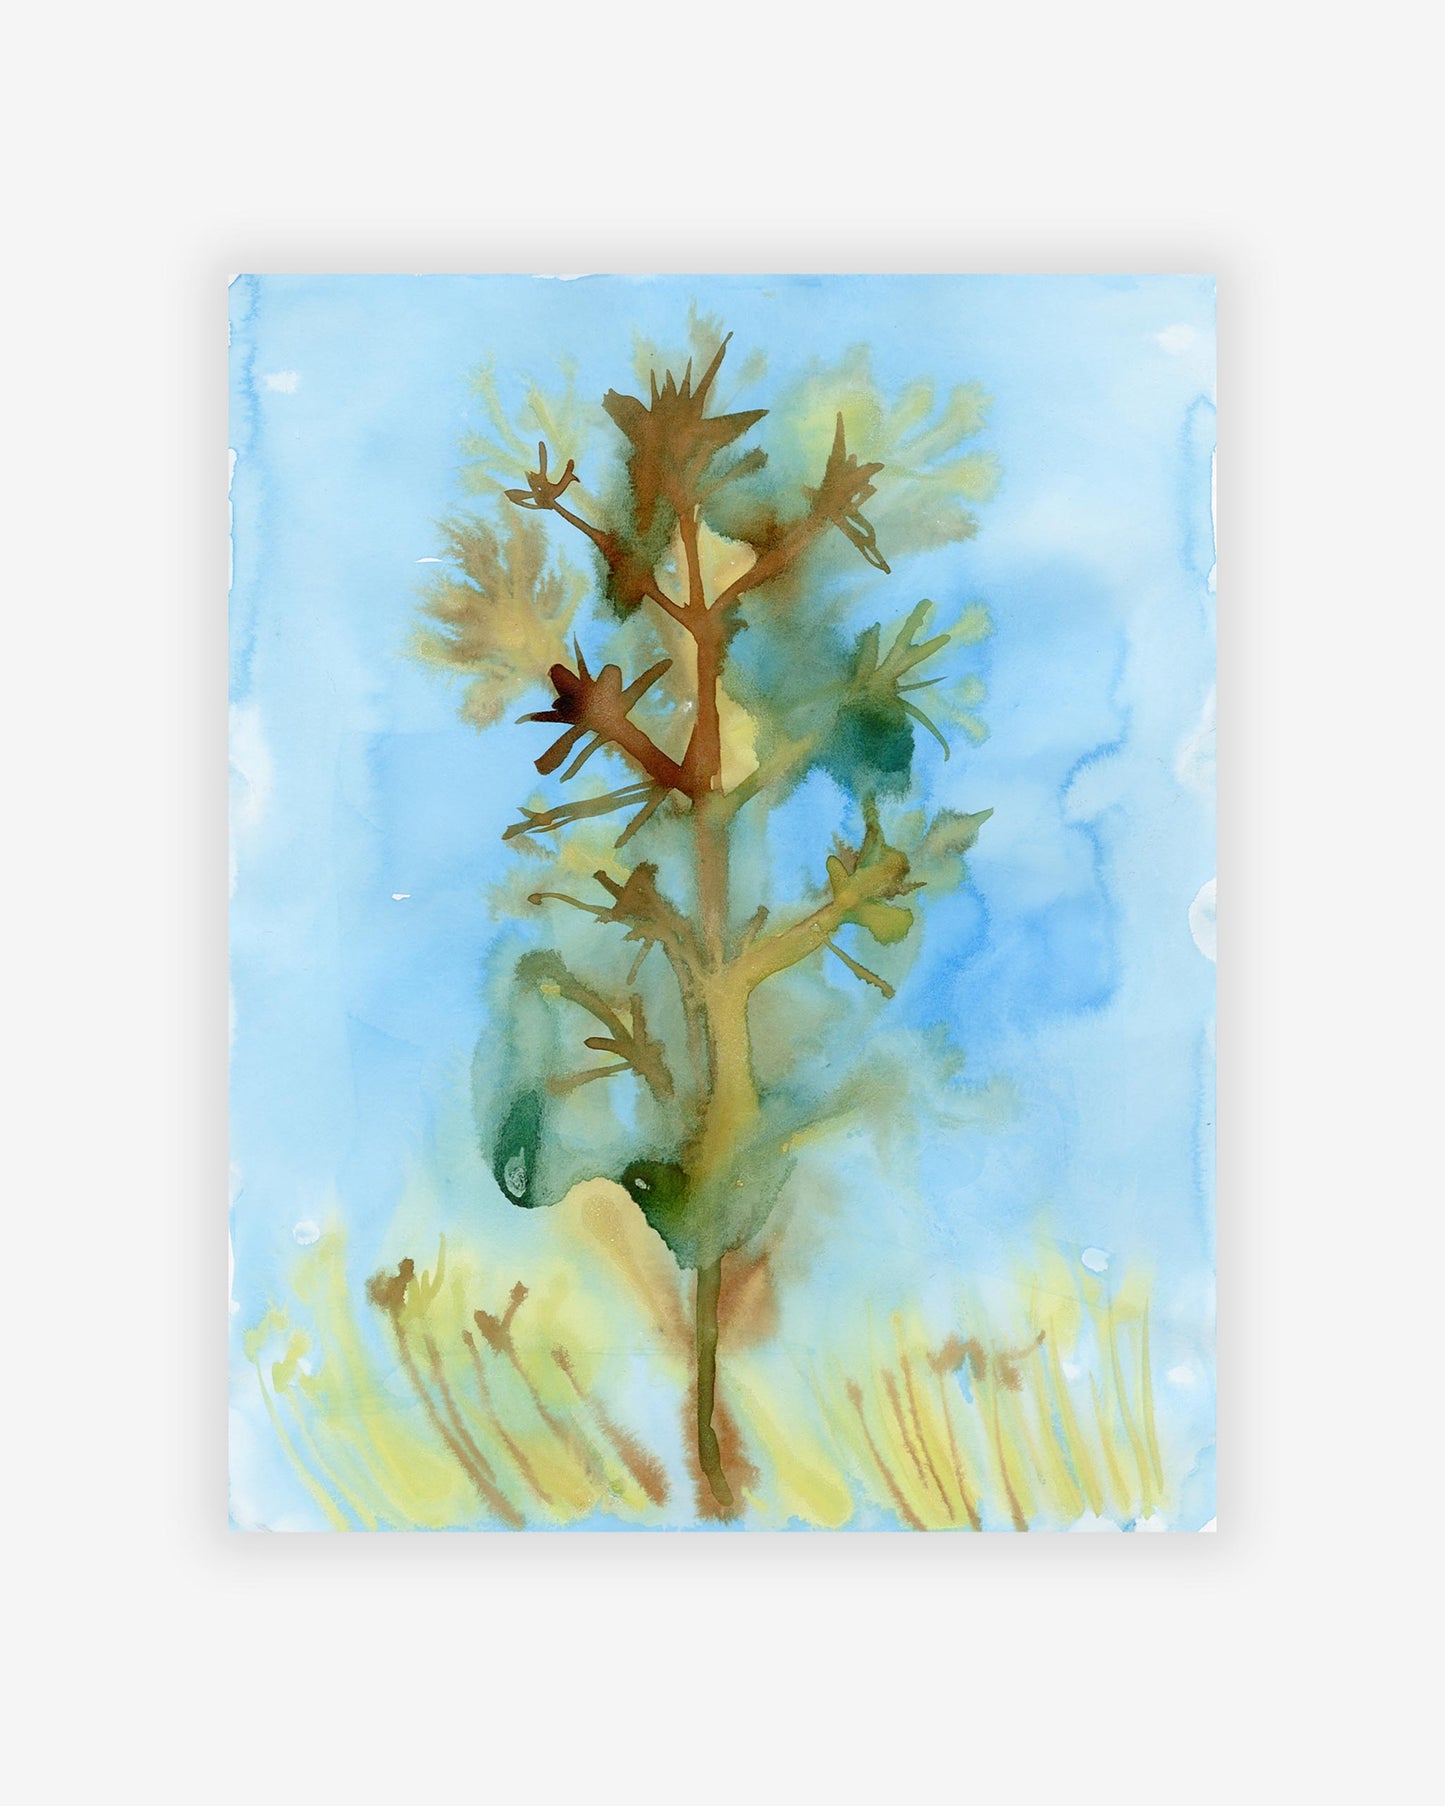 An Eskayel artist created a Century Bloom Print of a tree on a blue background